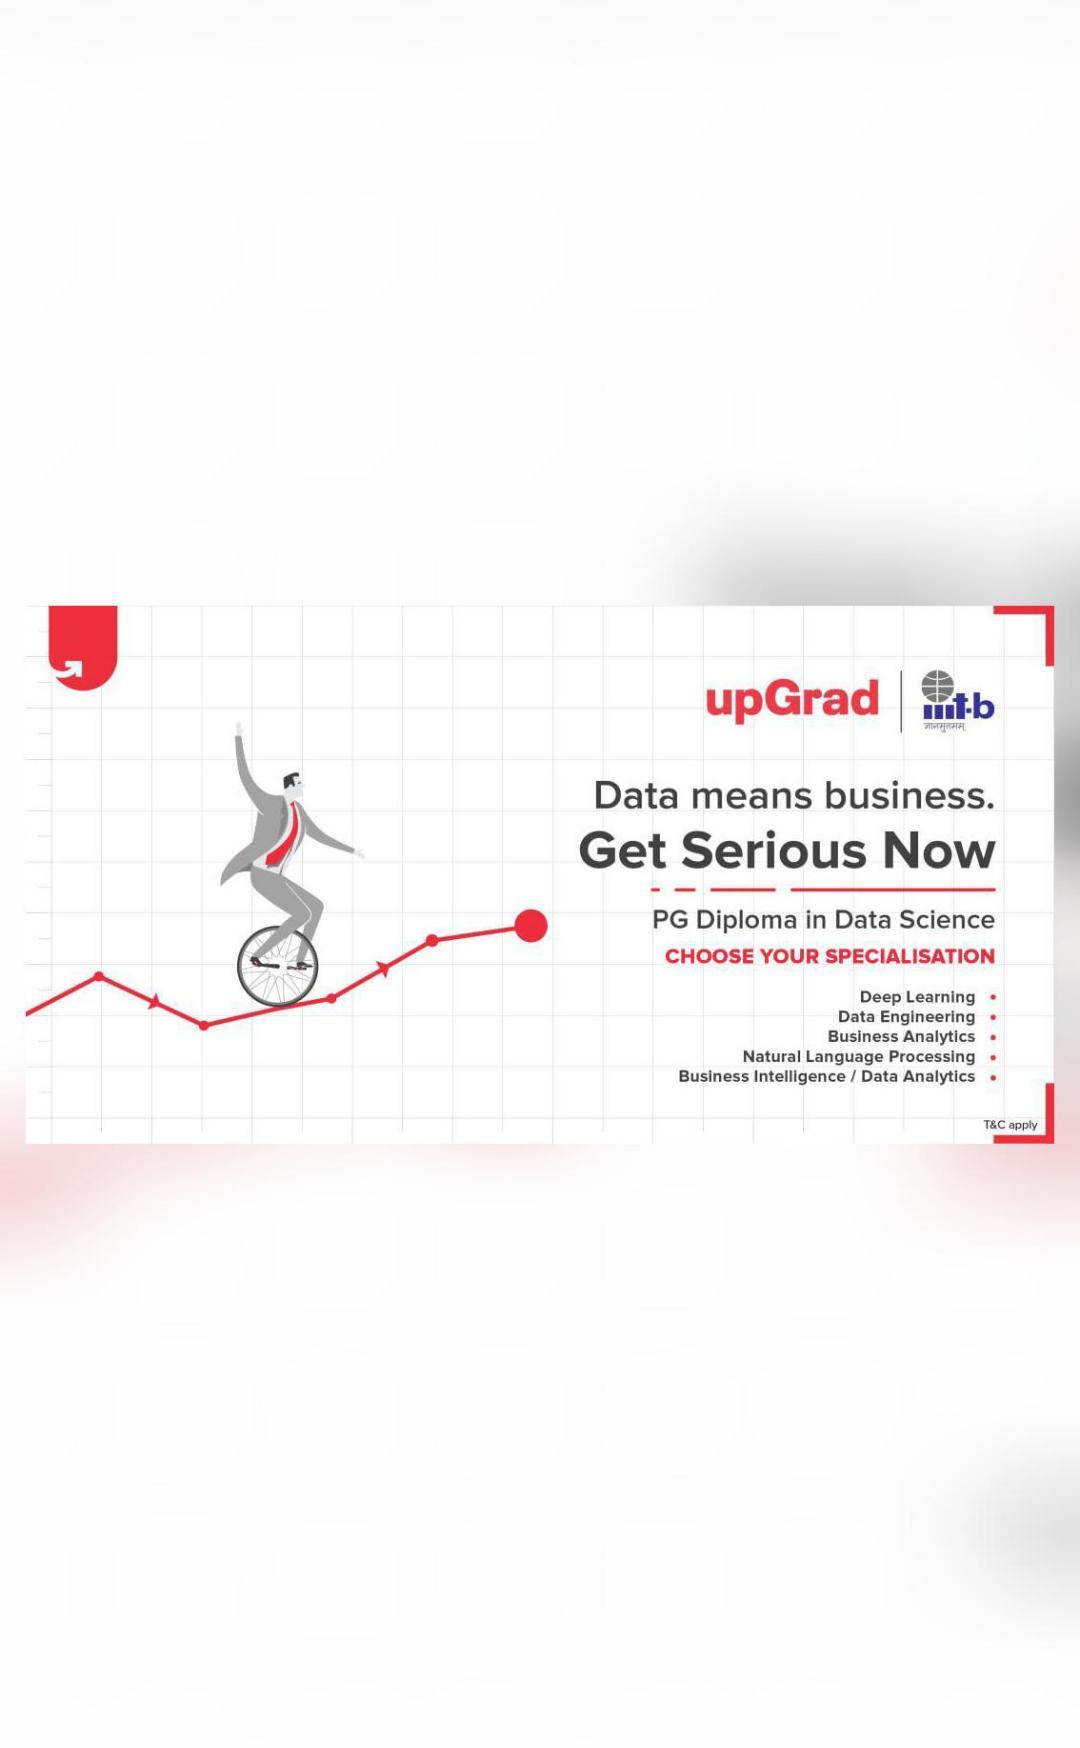 upgrad-s-pg-diploma-in-data-science-introduces-5-specializations